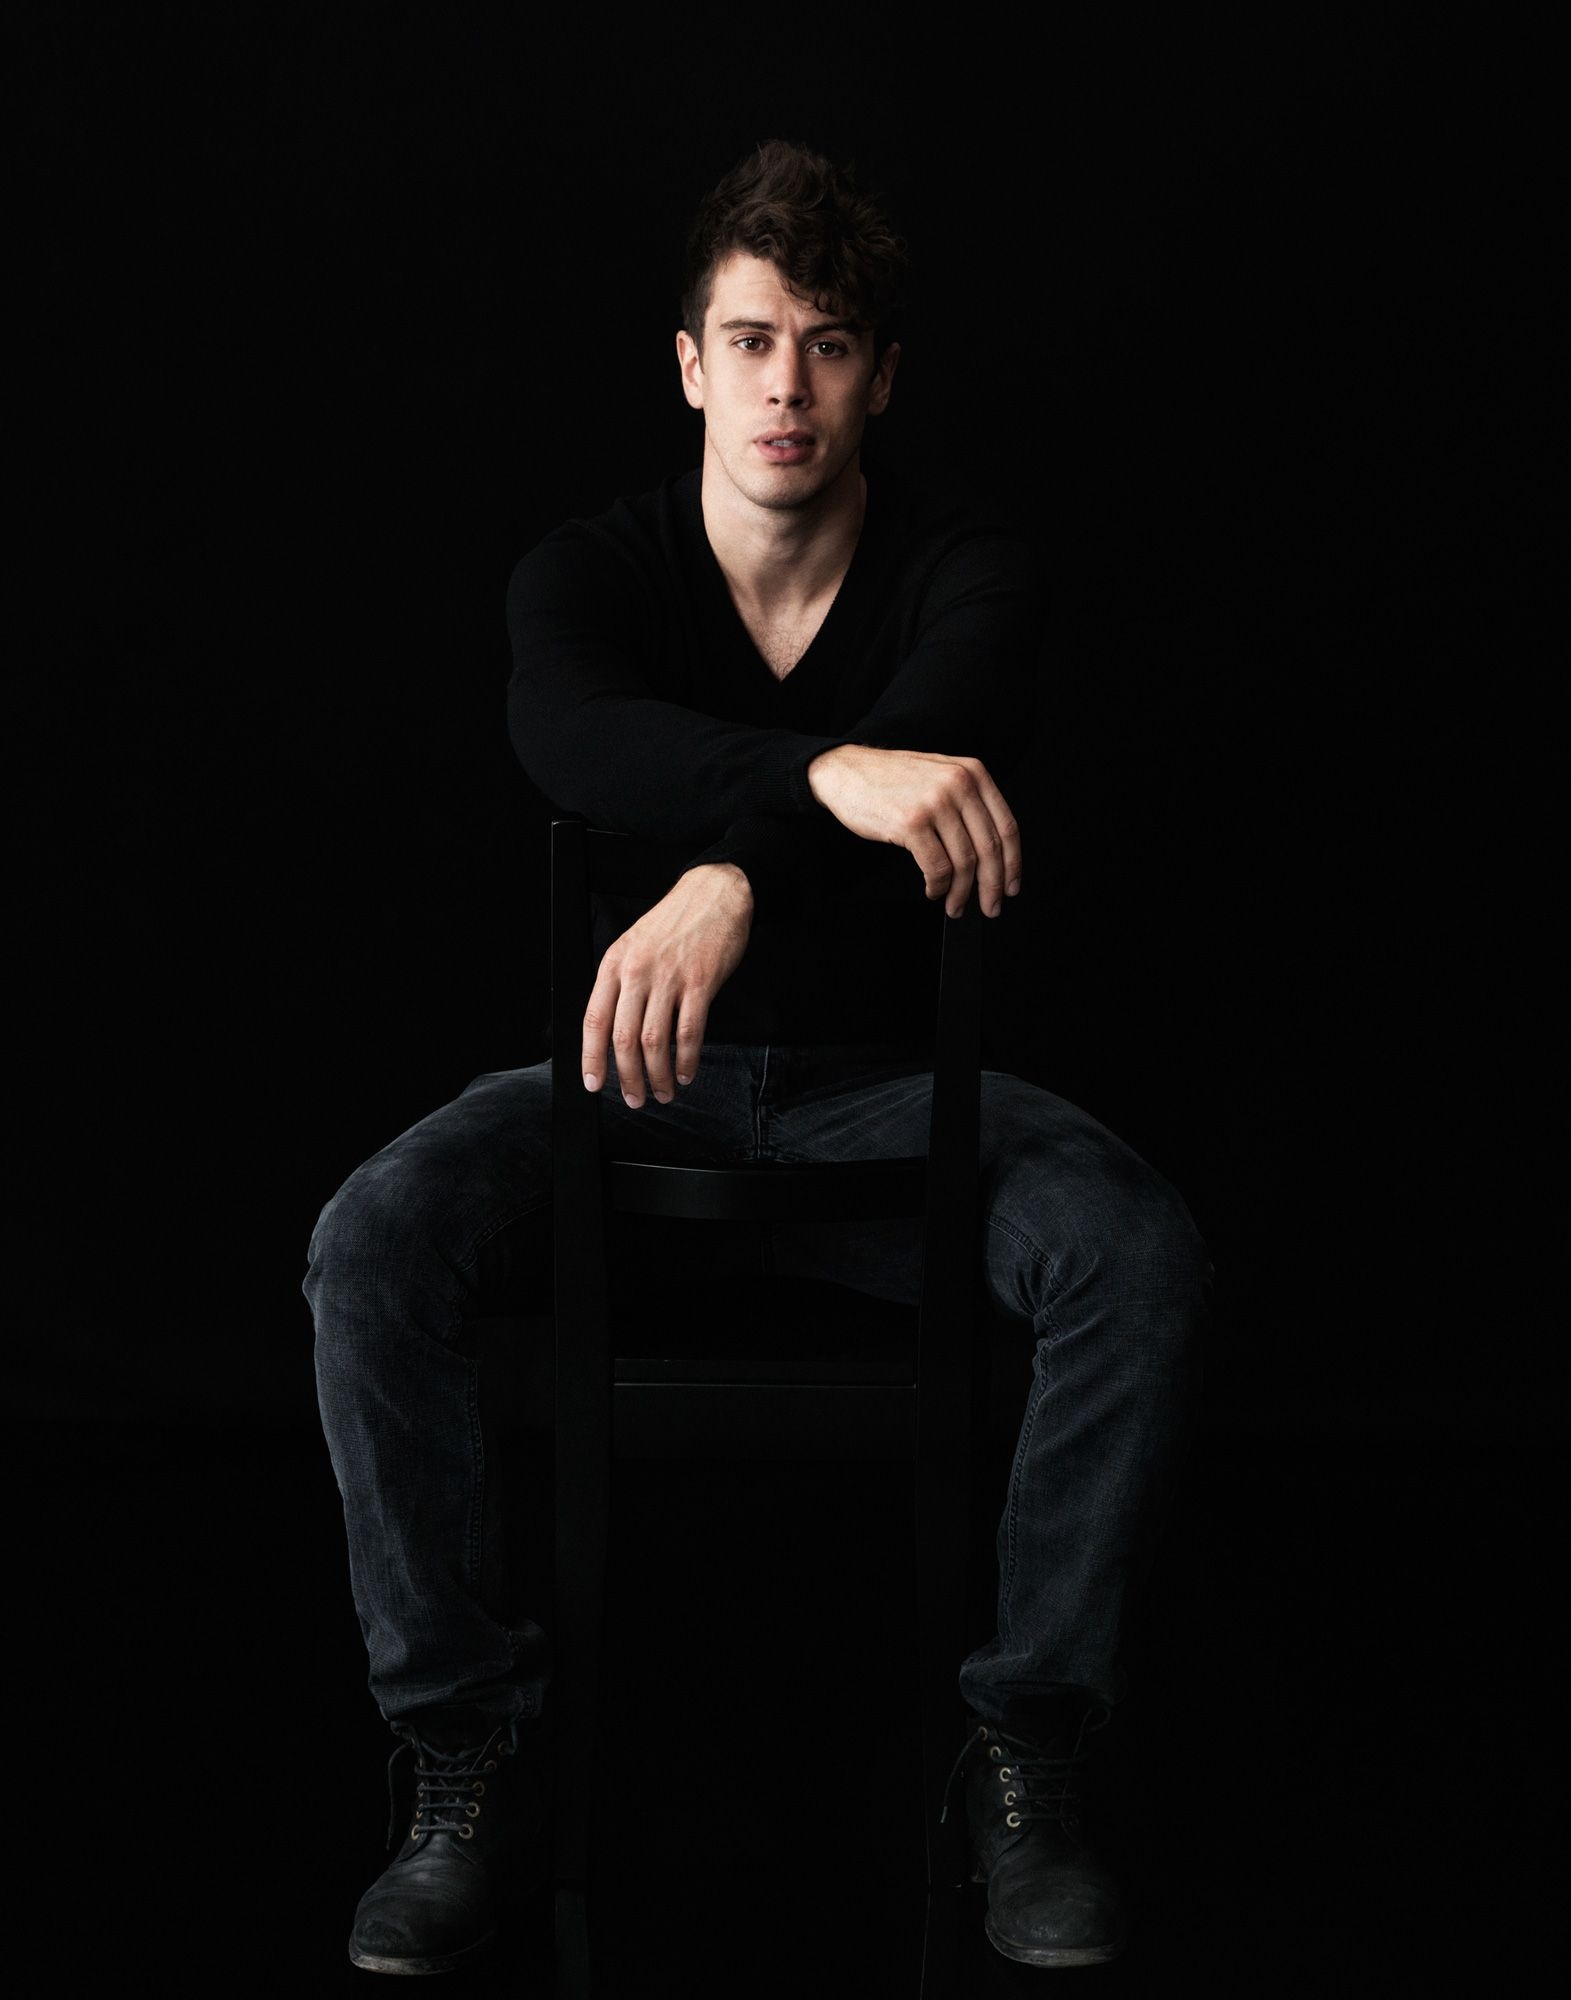 HD wallpaper, 1580X2000 Hd Phone, Toby Kebbell, Hot Images, Latest Photos Collection, Mobile Hd Toby Kebbell Background Photo